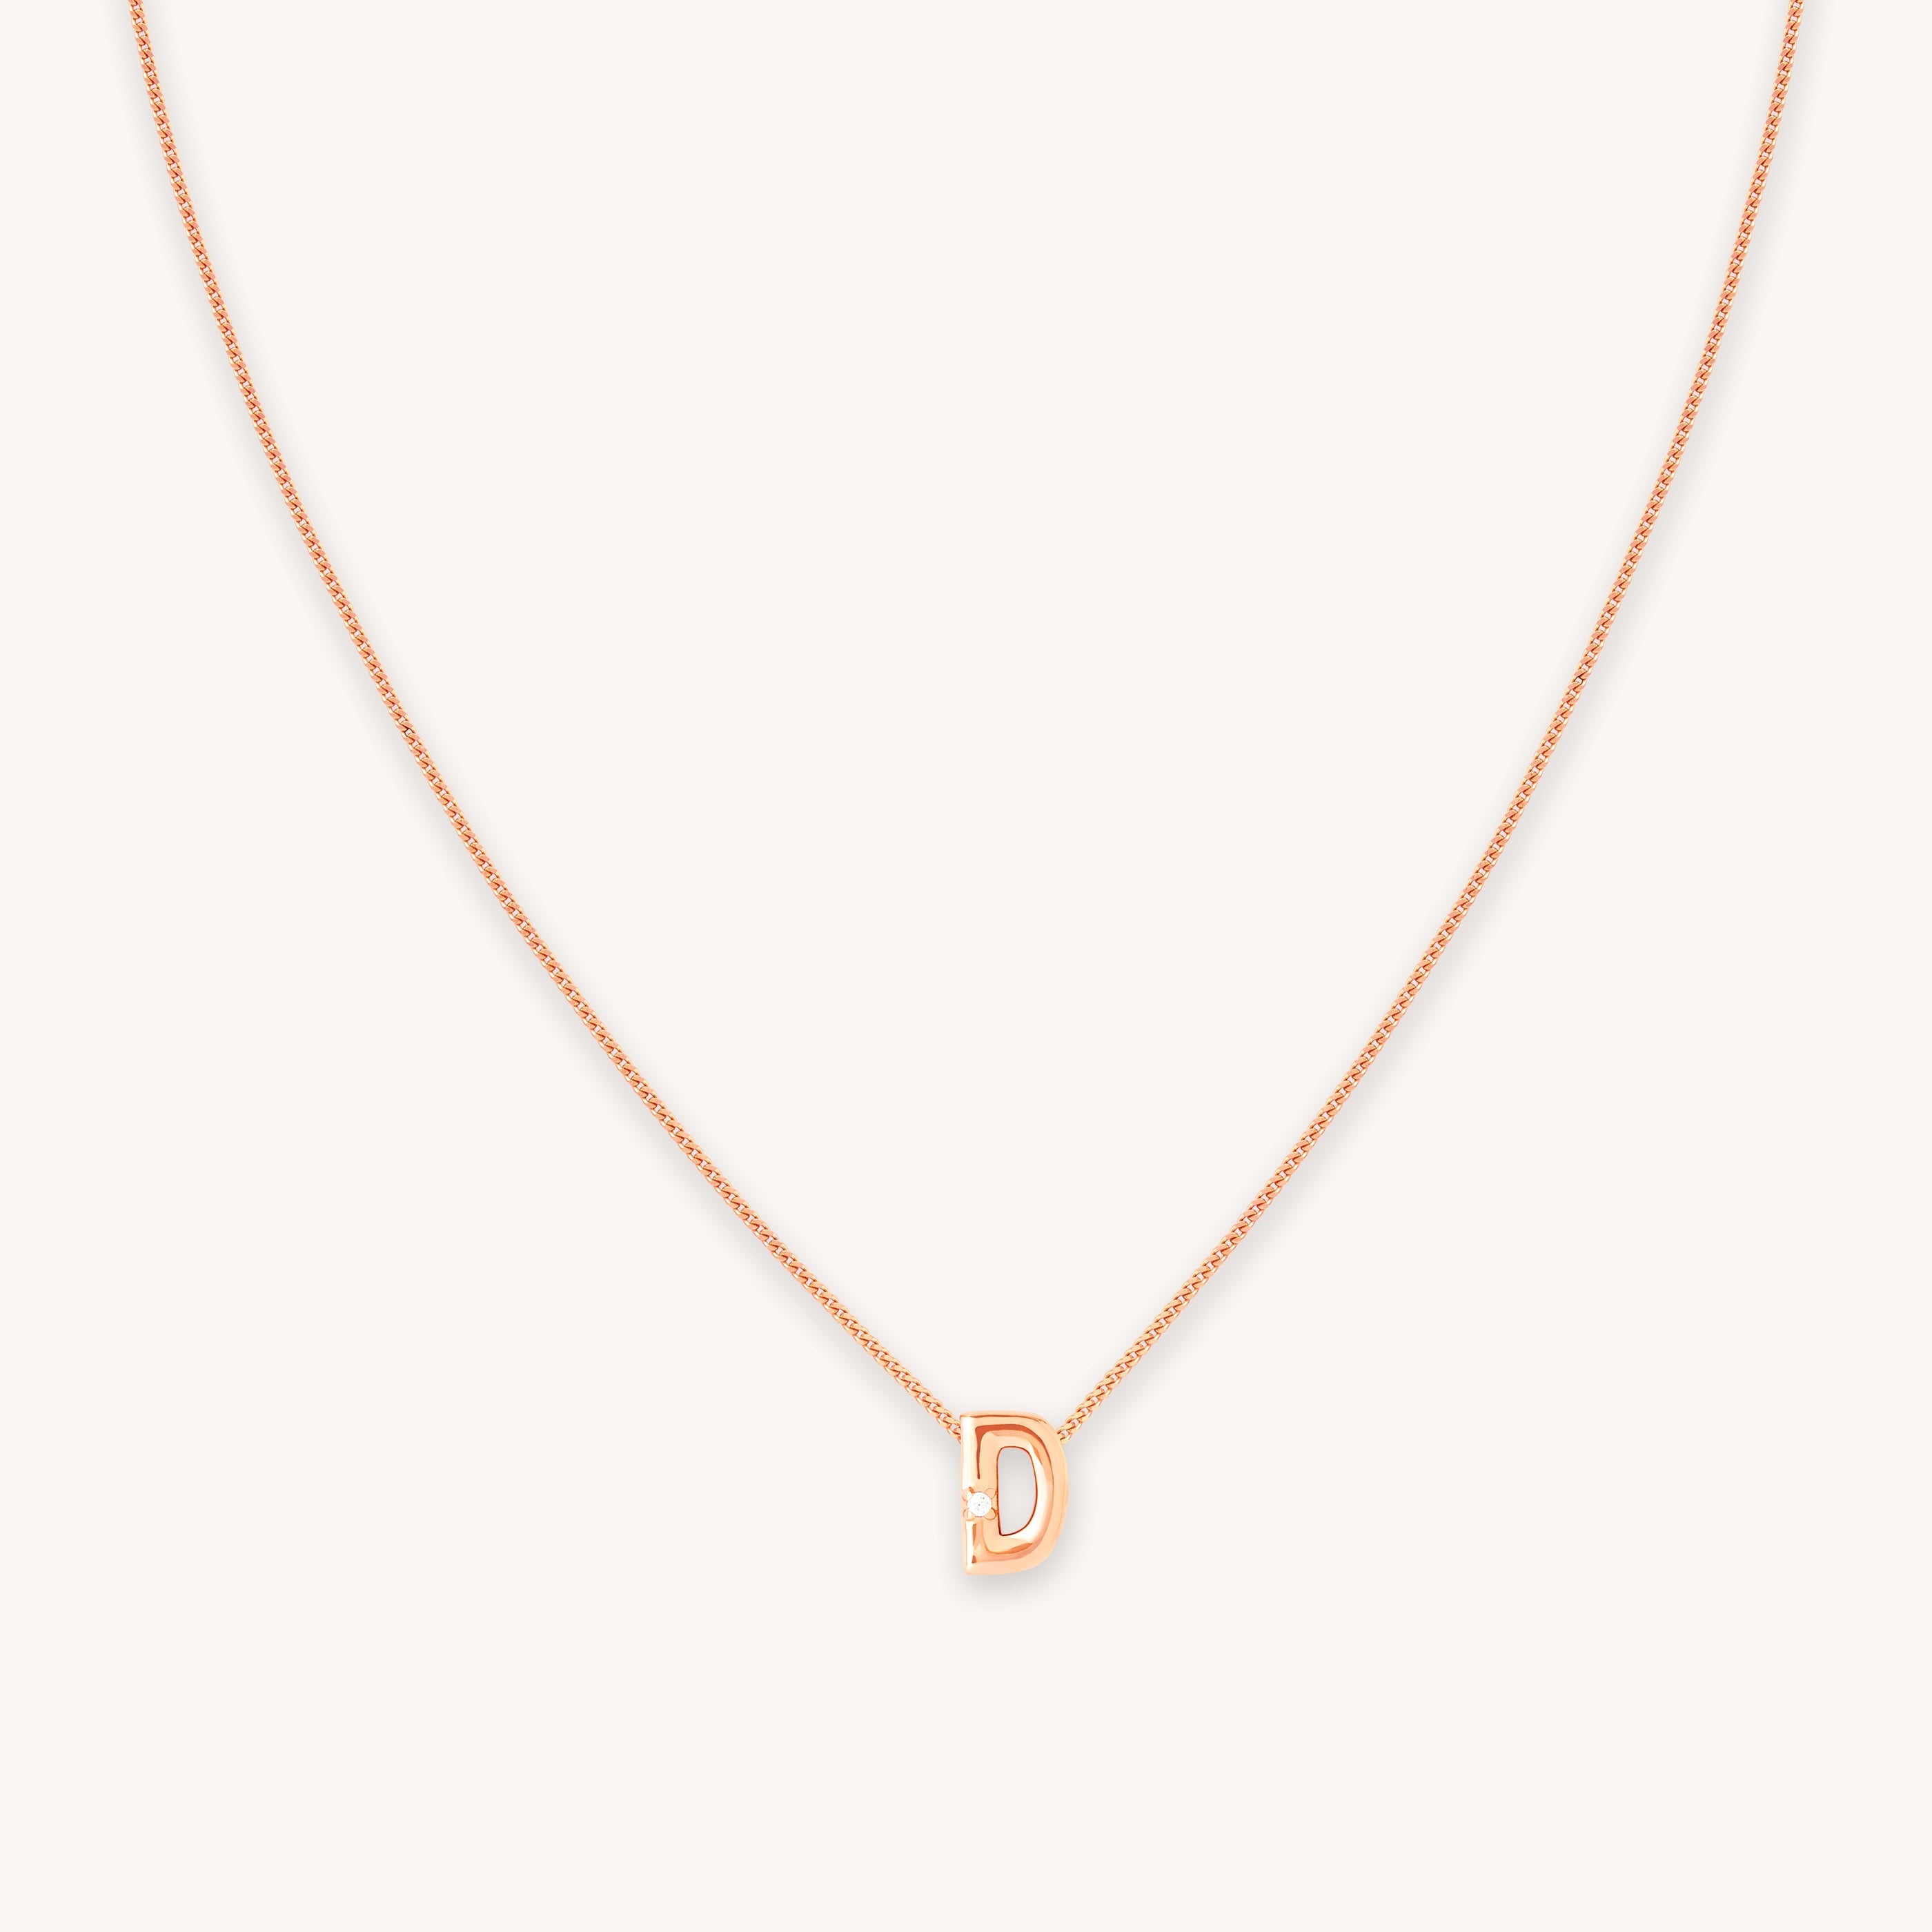 D Initial Pendant Necklace in Rose Gold